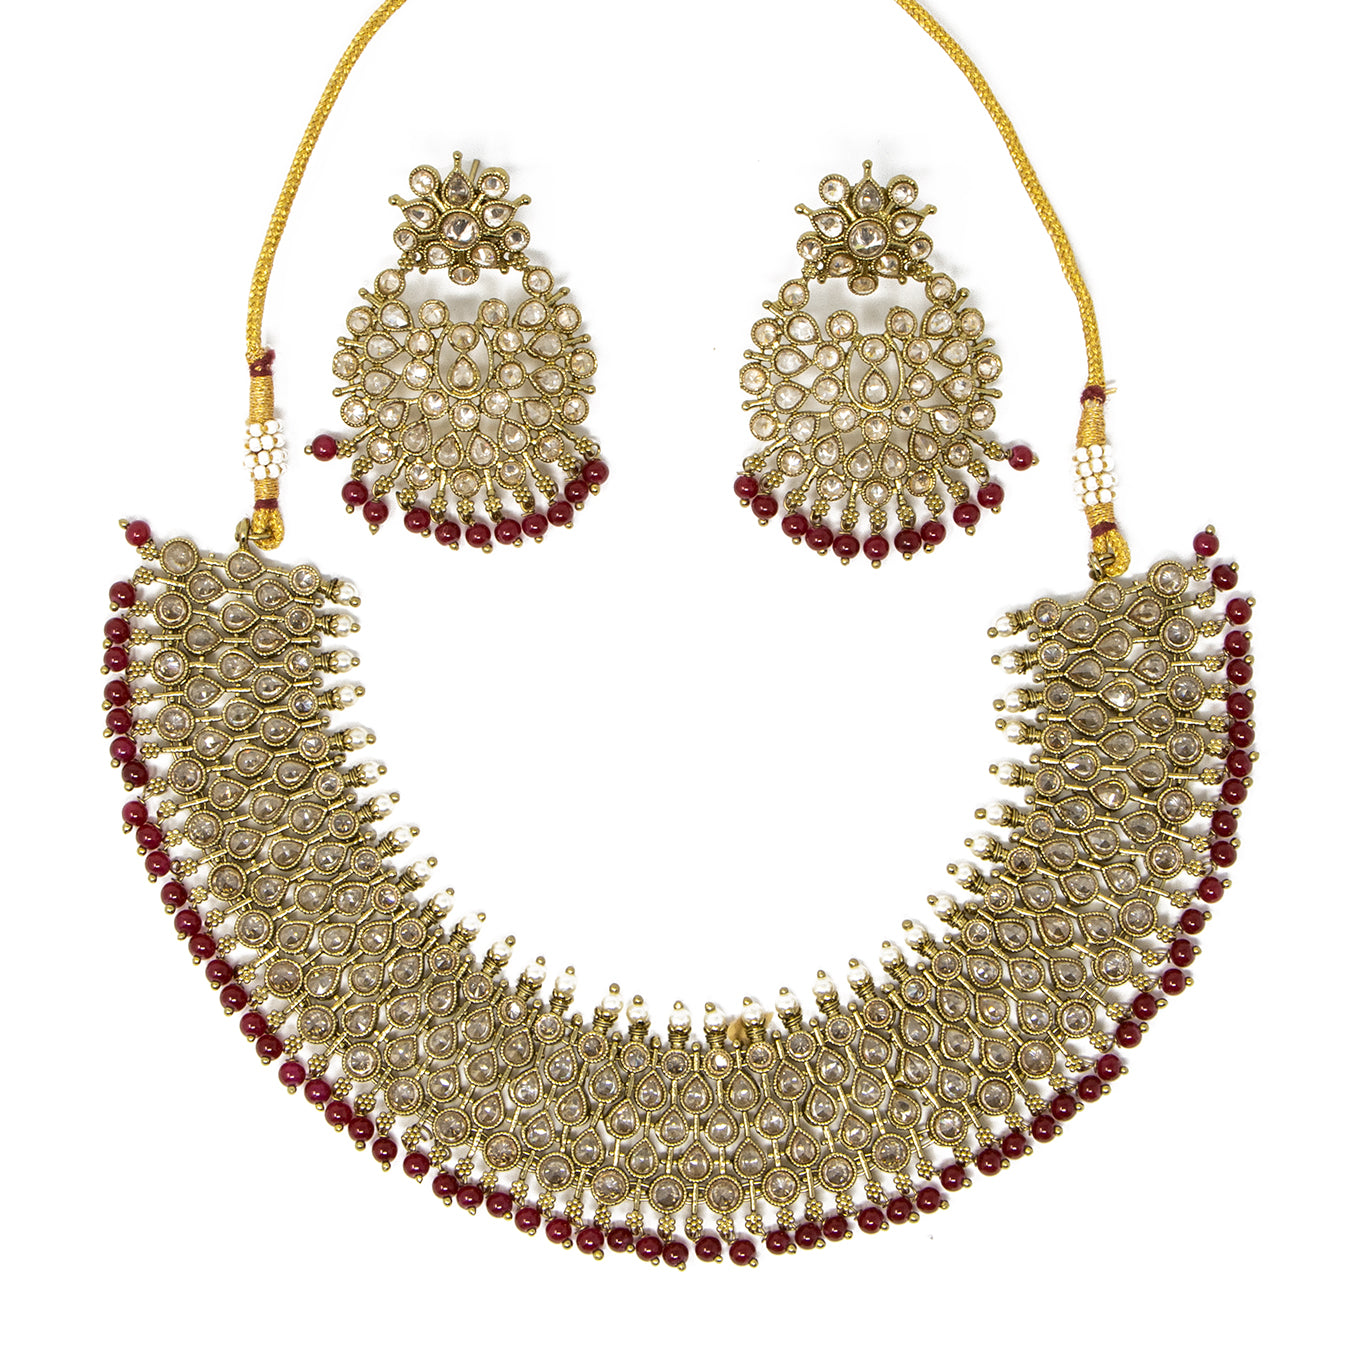 A Champagne Gold and Red 2 piece traditional set: Necklace with earrings.